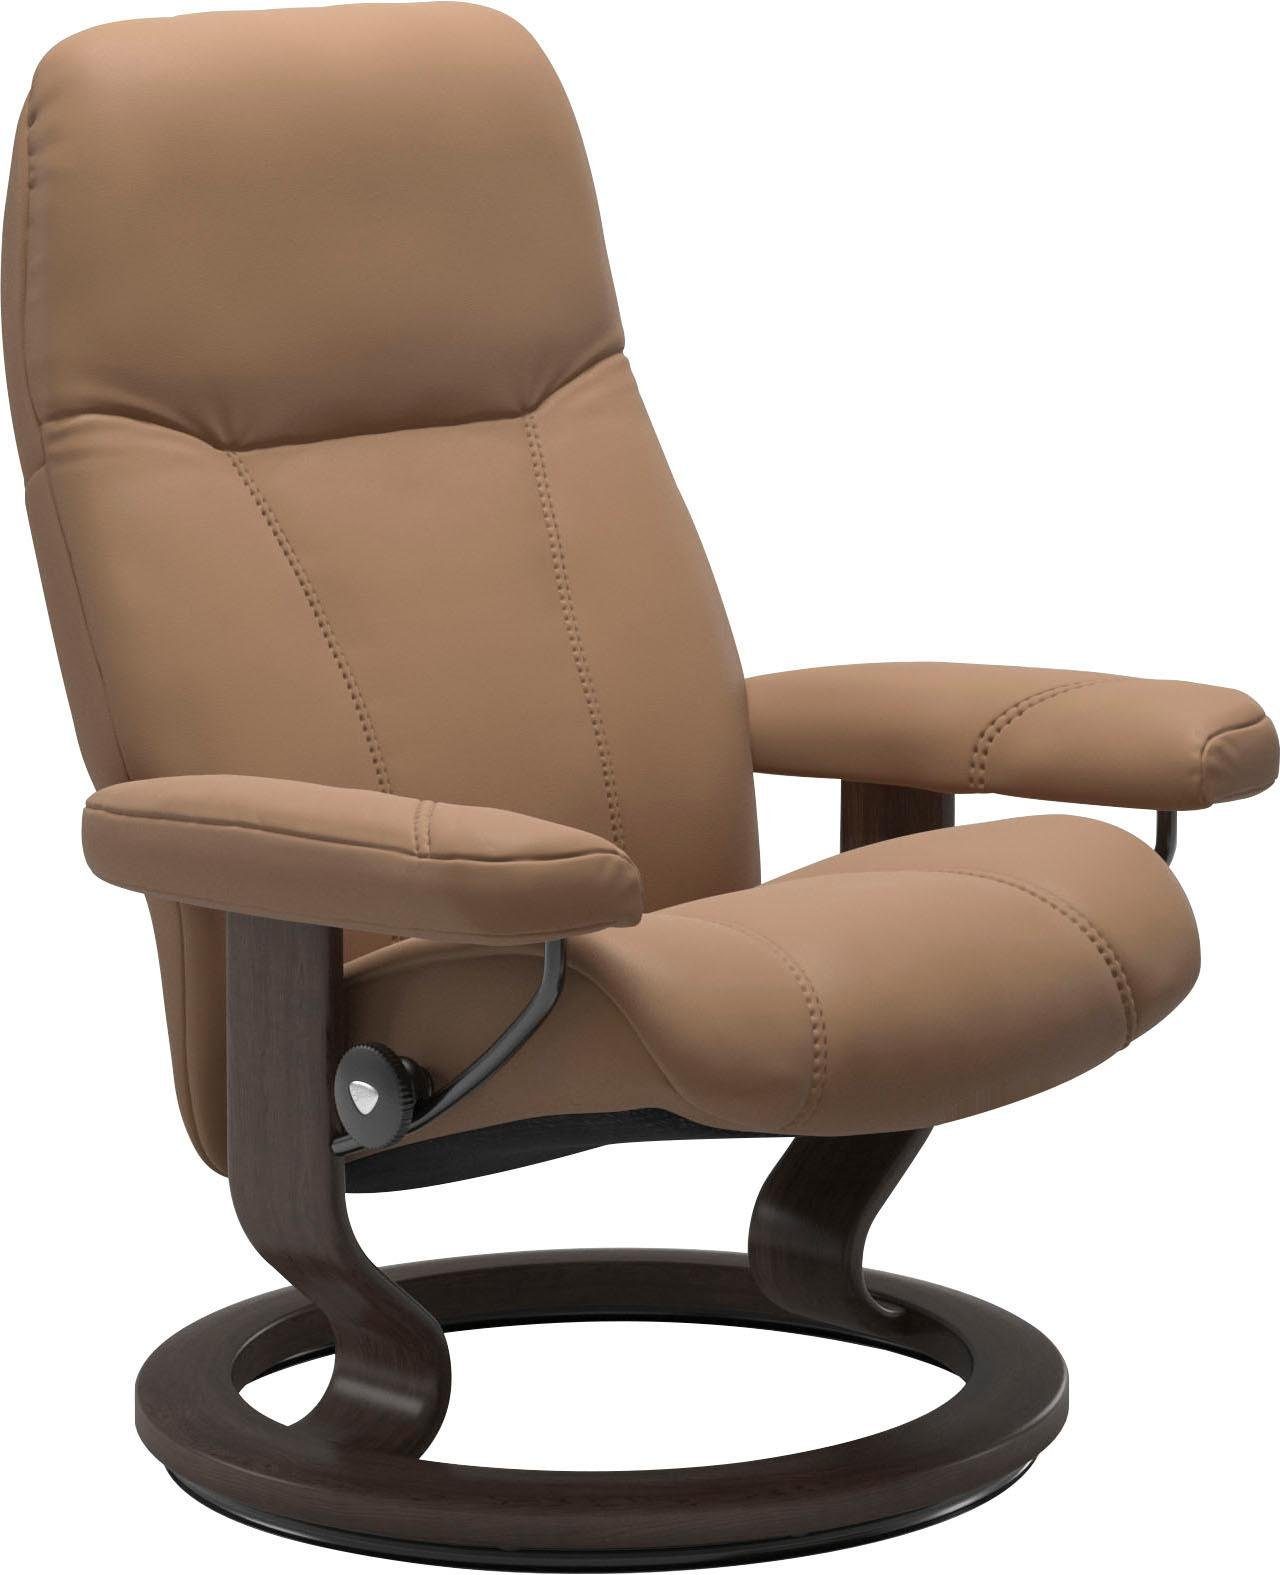 Consul, Relaxsessel Stressless® Classic Größe mit S, Wenge Gestell Base,